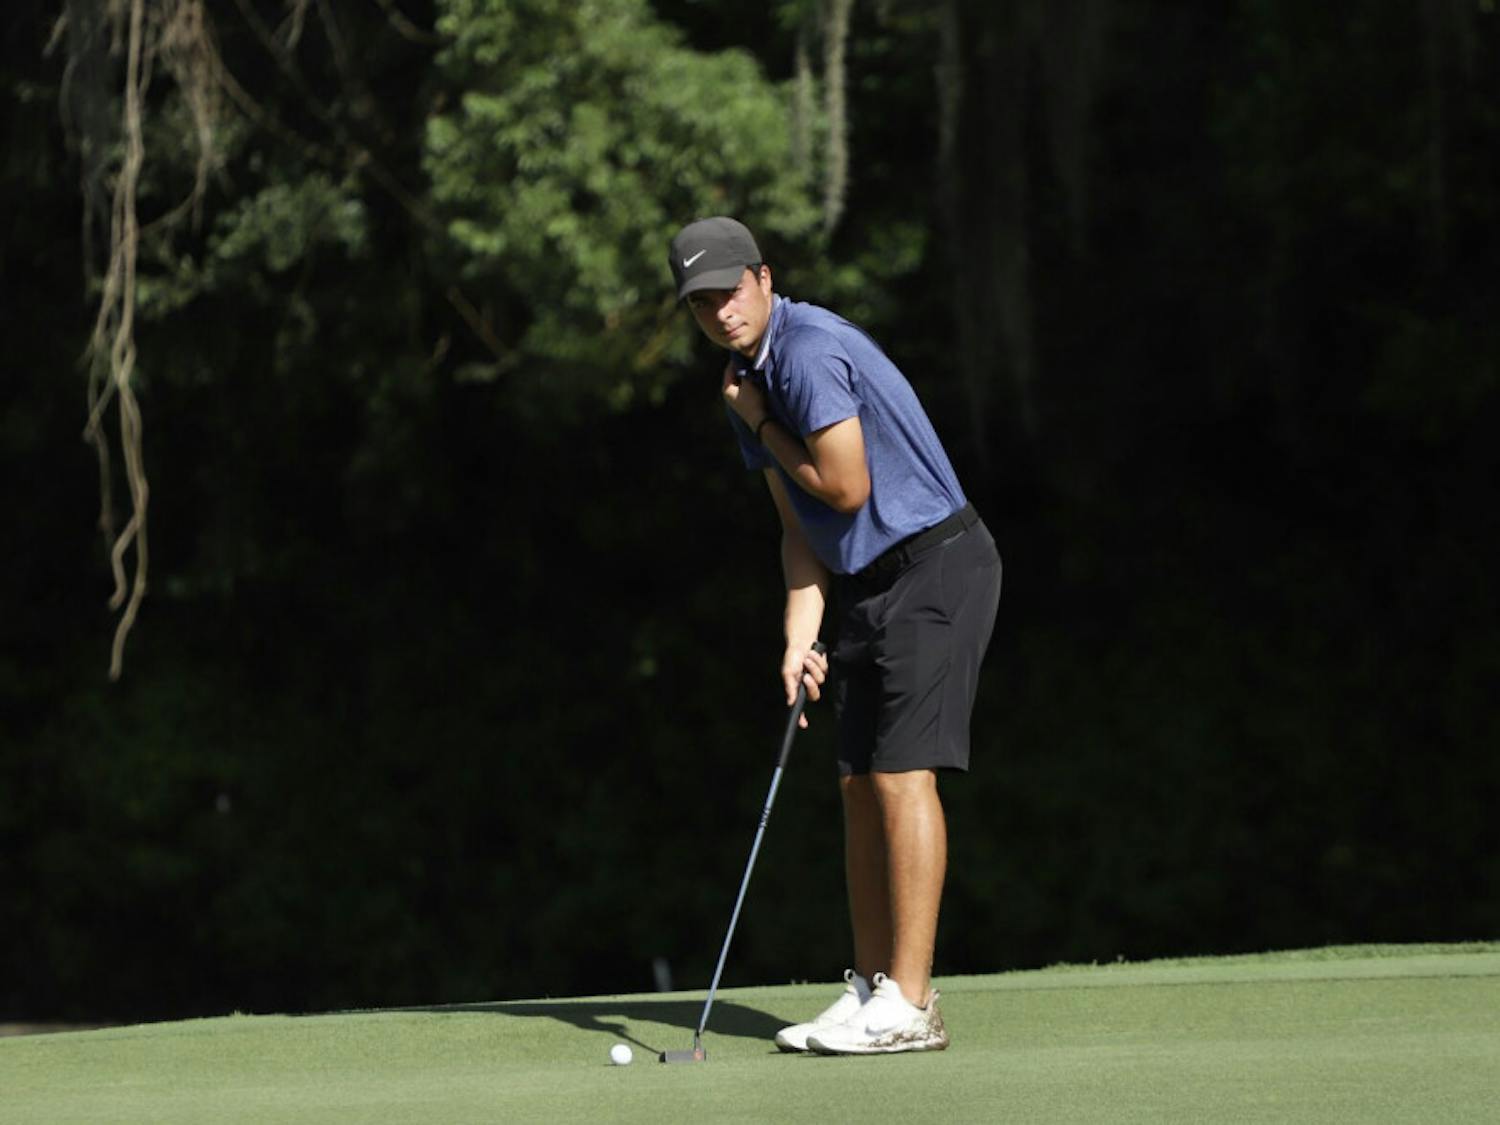 Fred Biondi shot a team-best 6-under-par 64 in the final round of the Ben Hogan Collegiate Tuesday. The Florida men&#x27;s golf team finished ninth in the event. ﻿